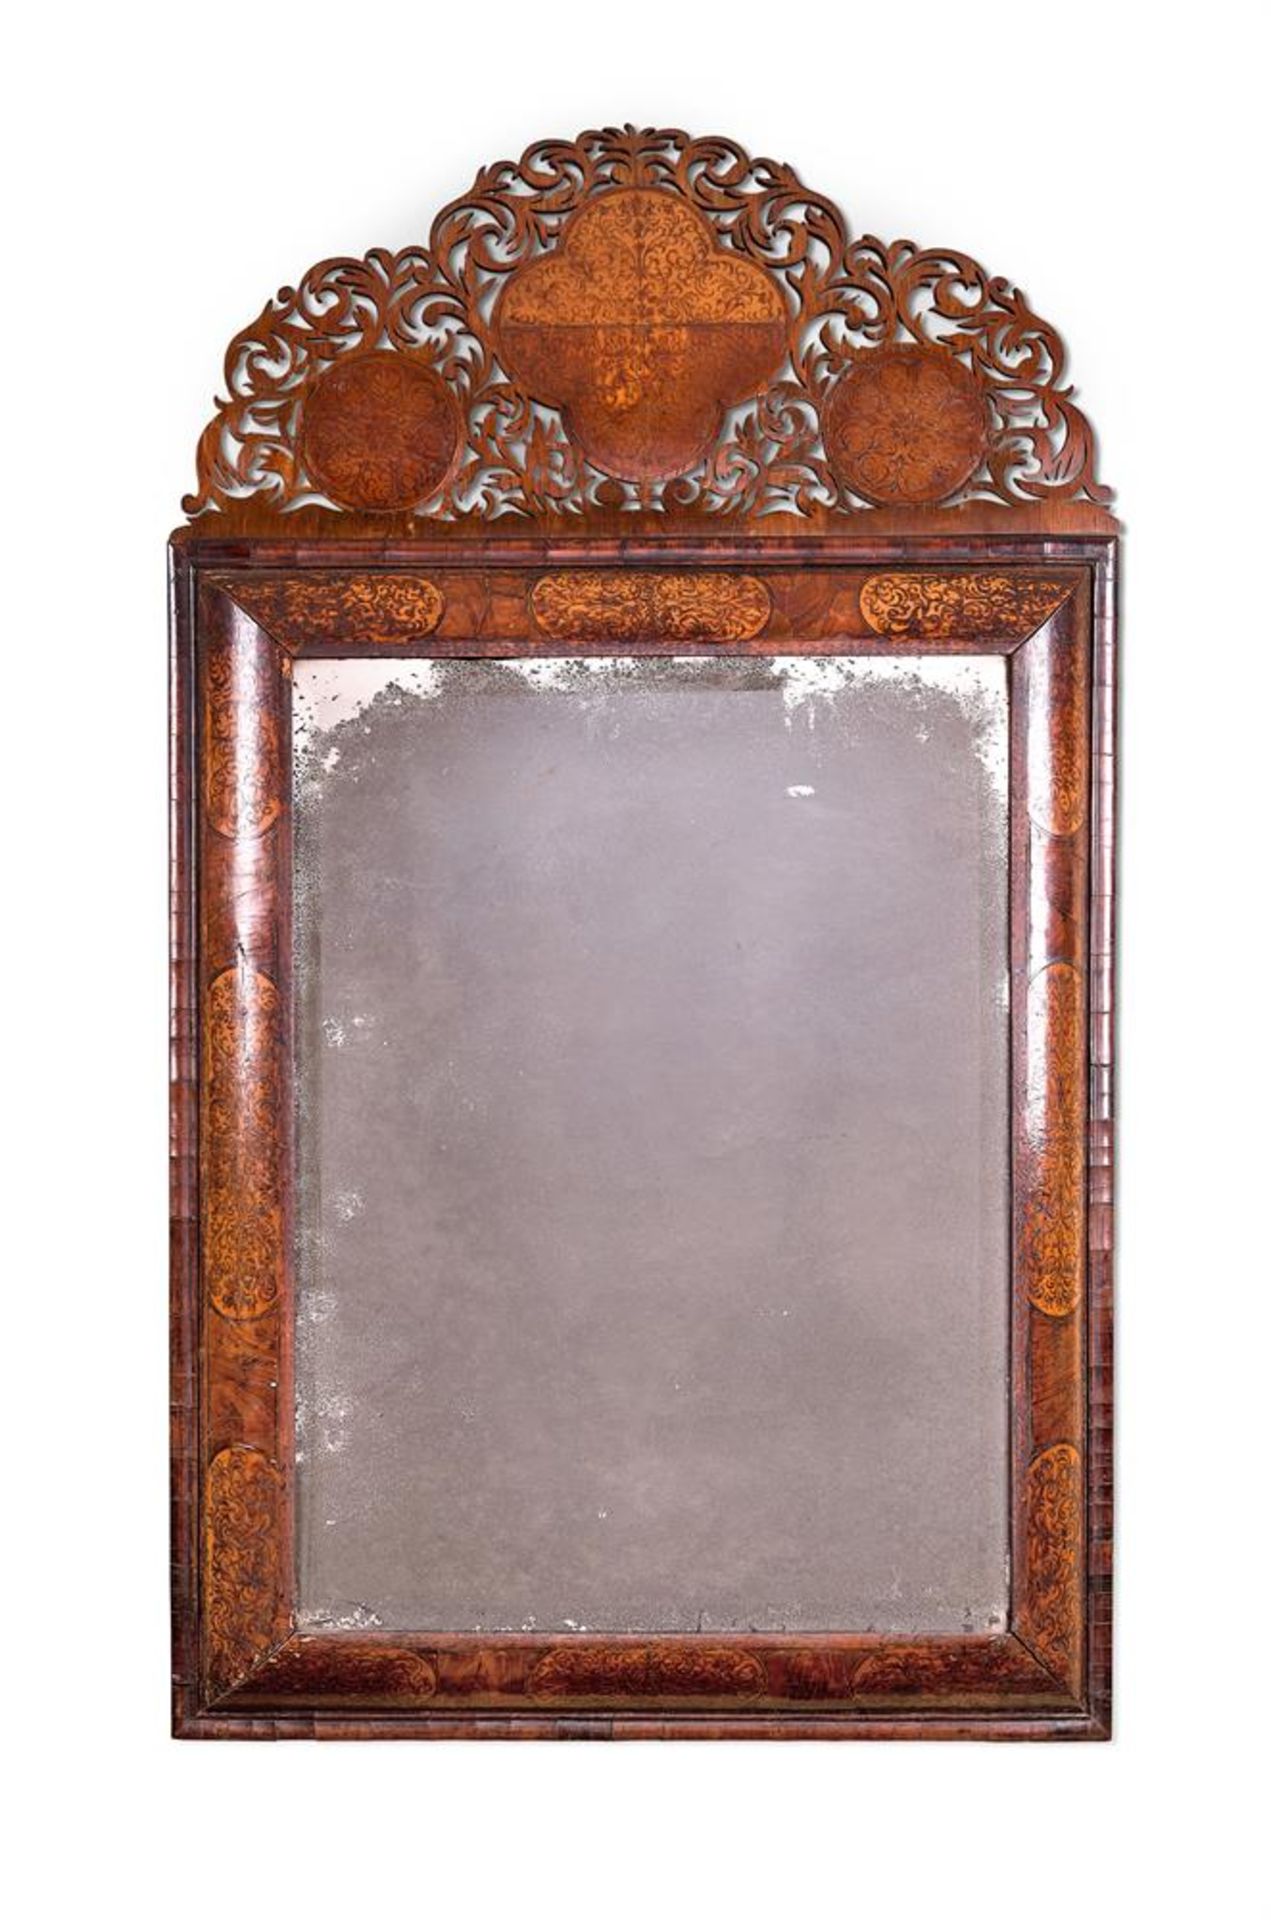 A WILLIAM AND MARY WALNUT AND SEAWEED MARQUETRY CUSHION-FRAMED MIRROR LATE 17TH CENTURY